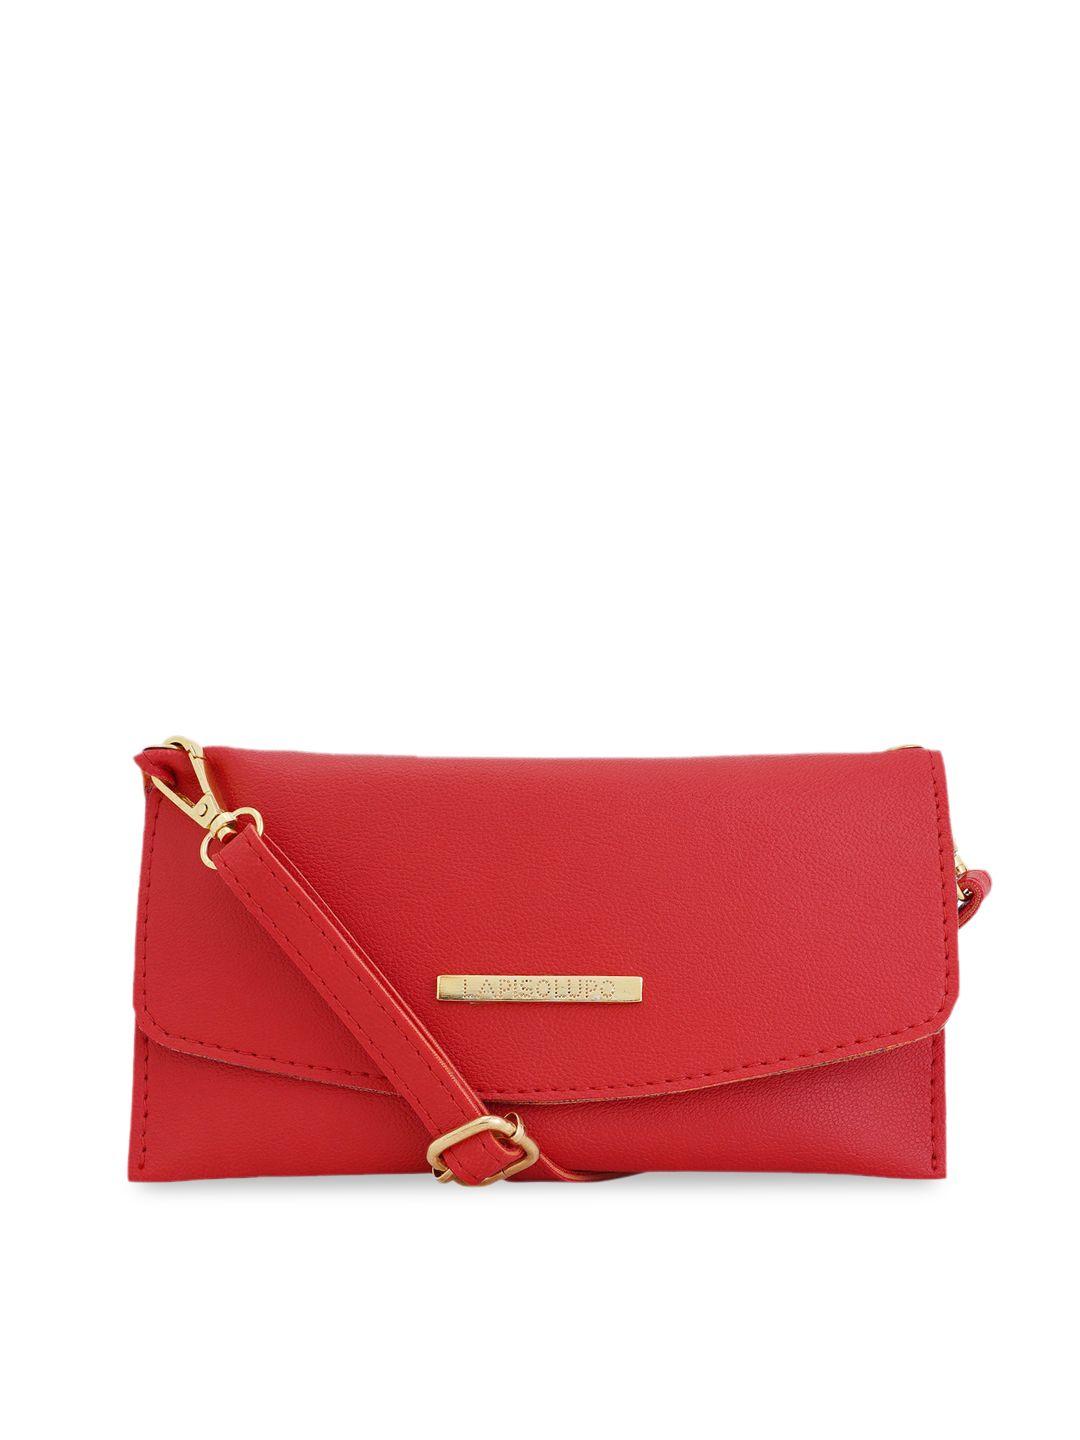 lapis o lupo red solid sling bag